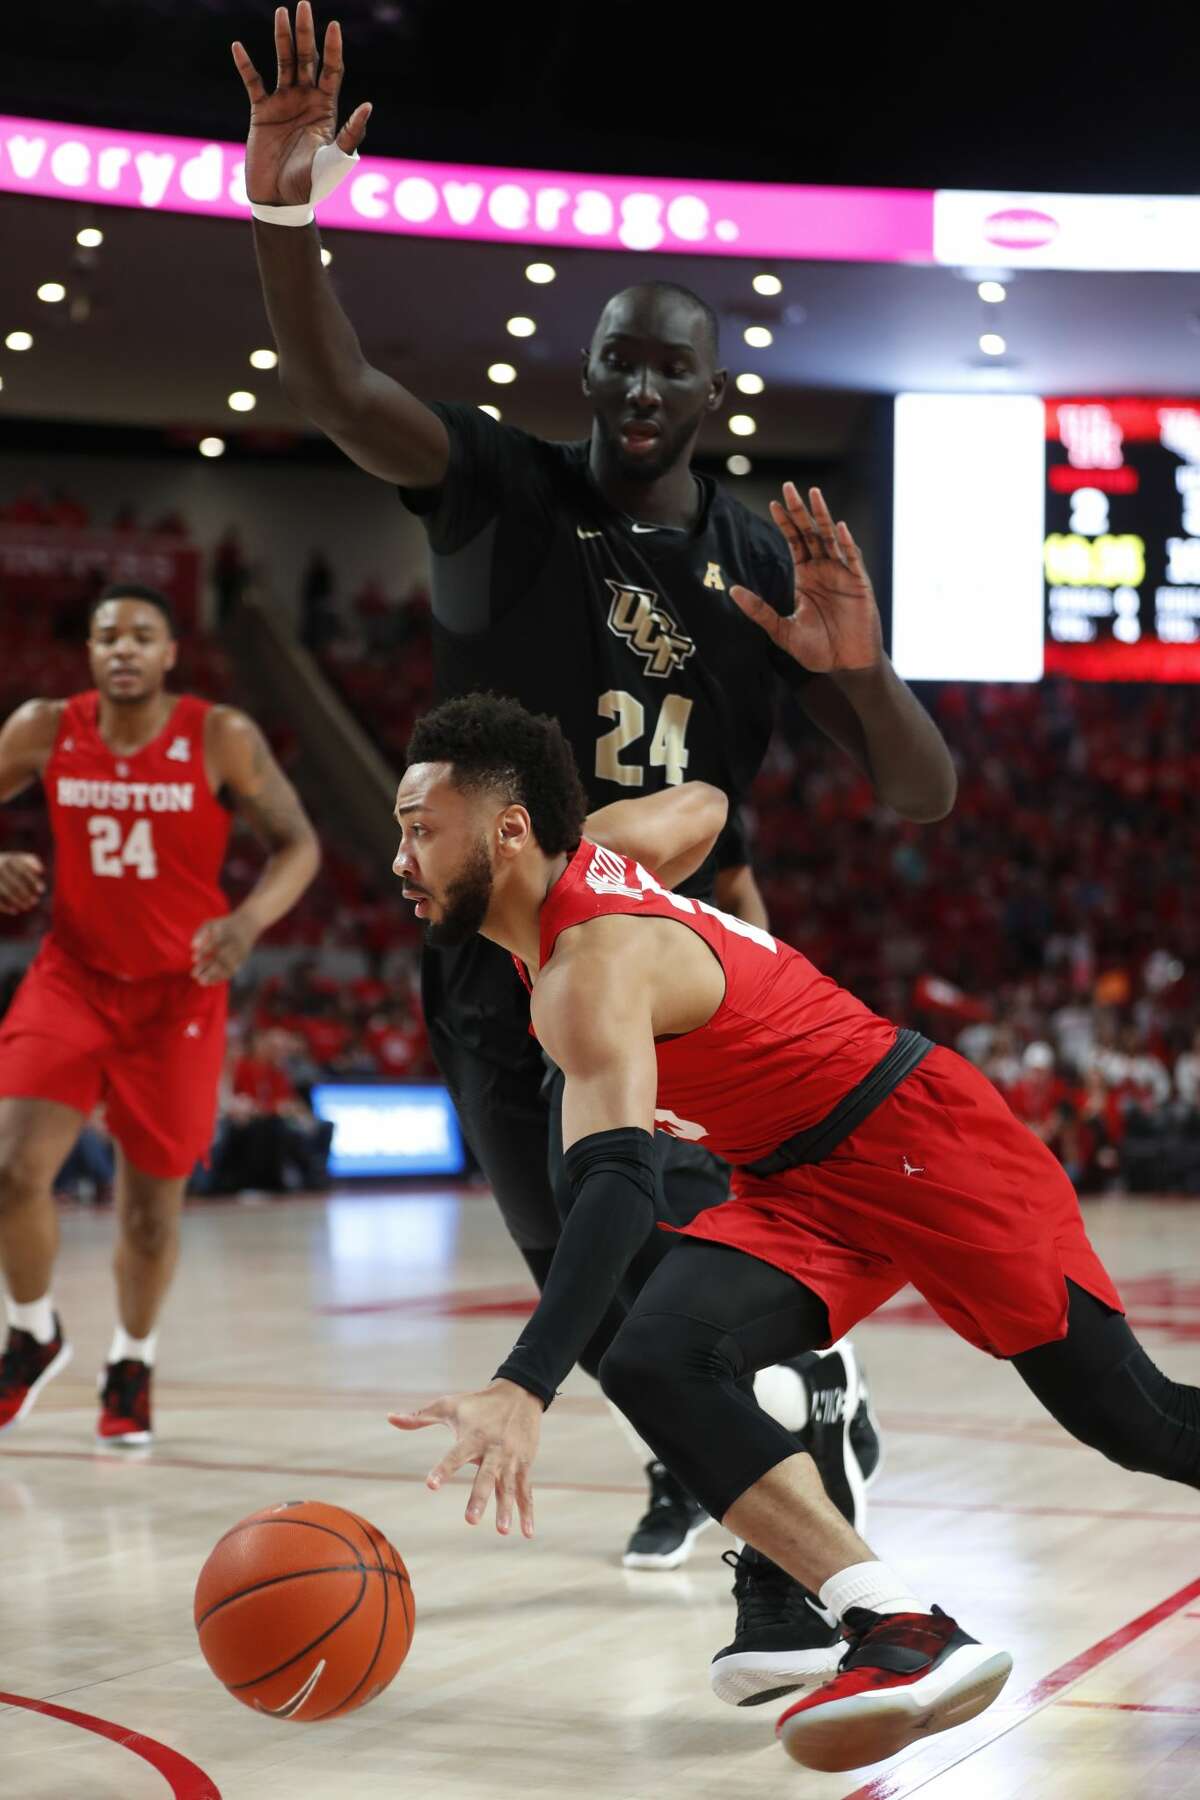 Houston guard Galen Robinson Jr. (25) drives to the basket past Central Florida center Tacko Fall (24) during the first half on a NCAA basketball game at Fertitta Center on Saturday, March 2, 2019, in Houston.